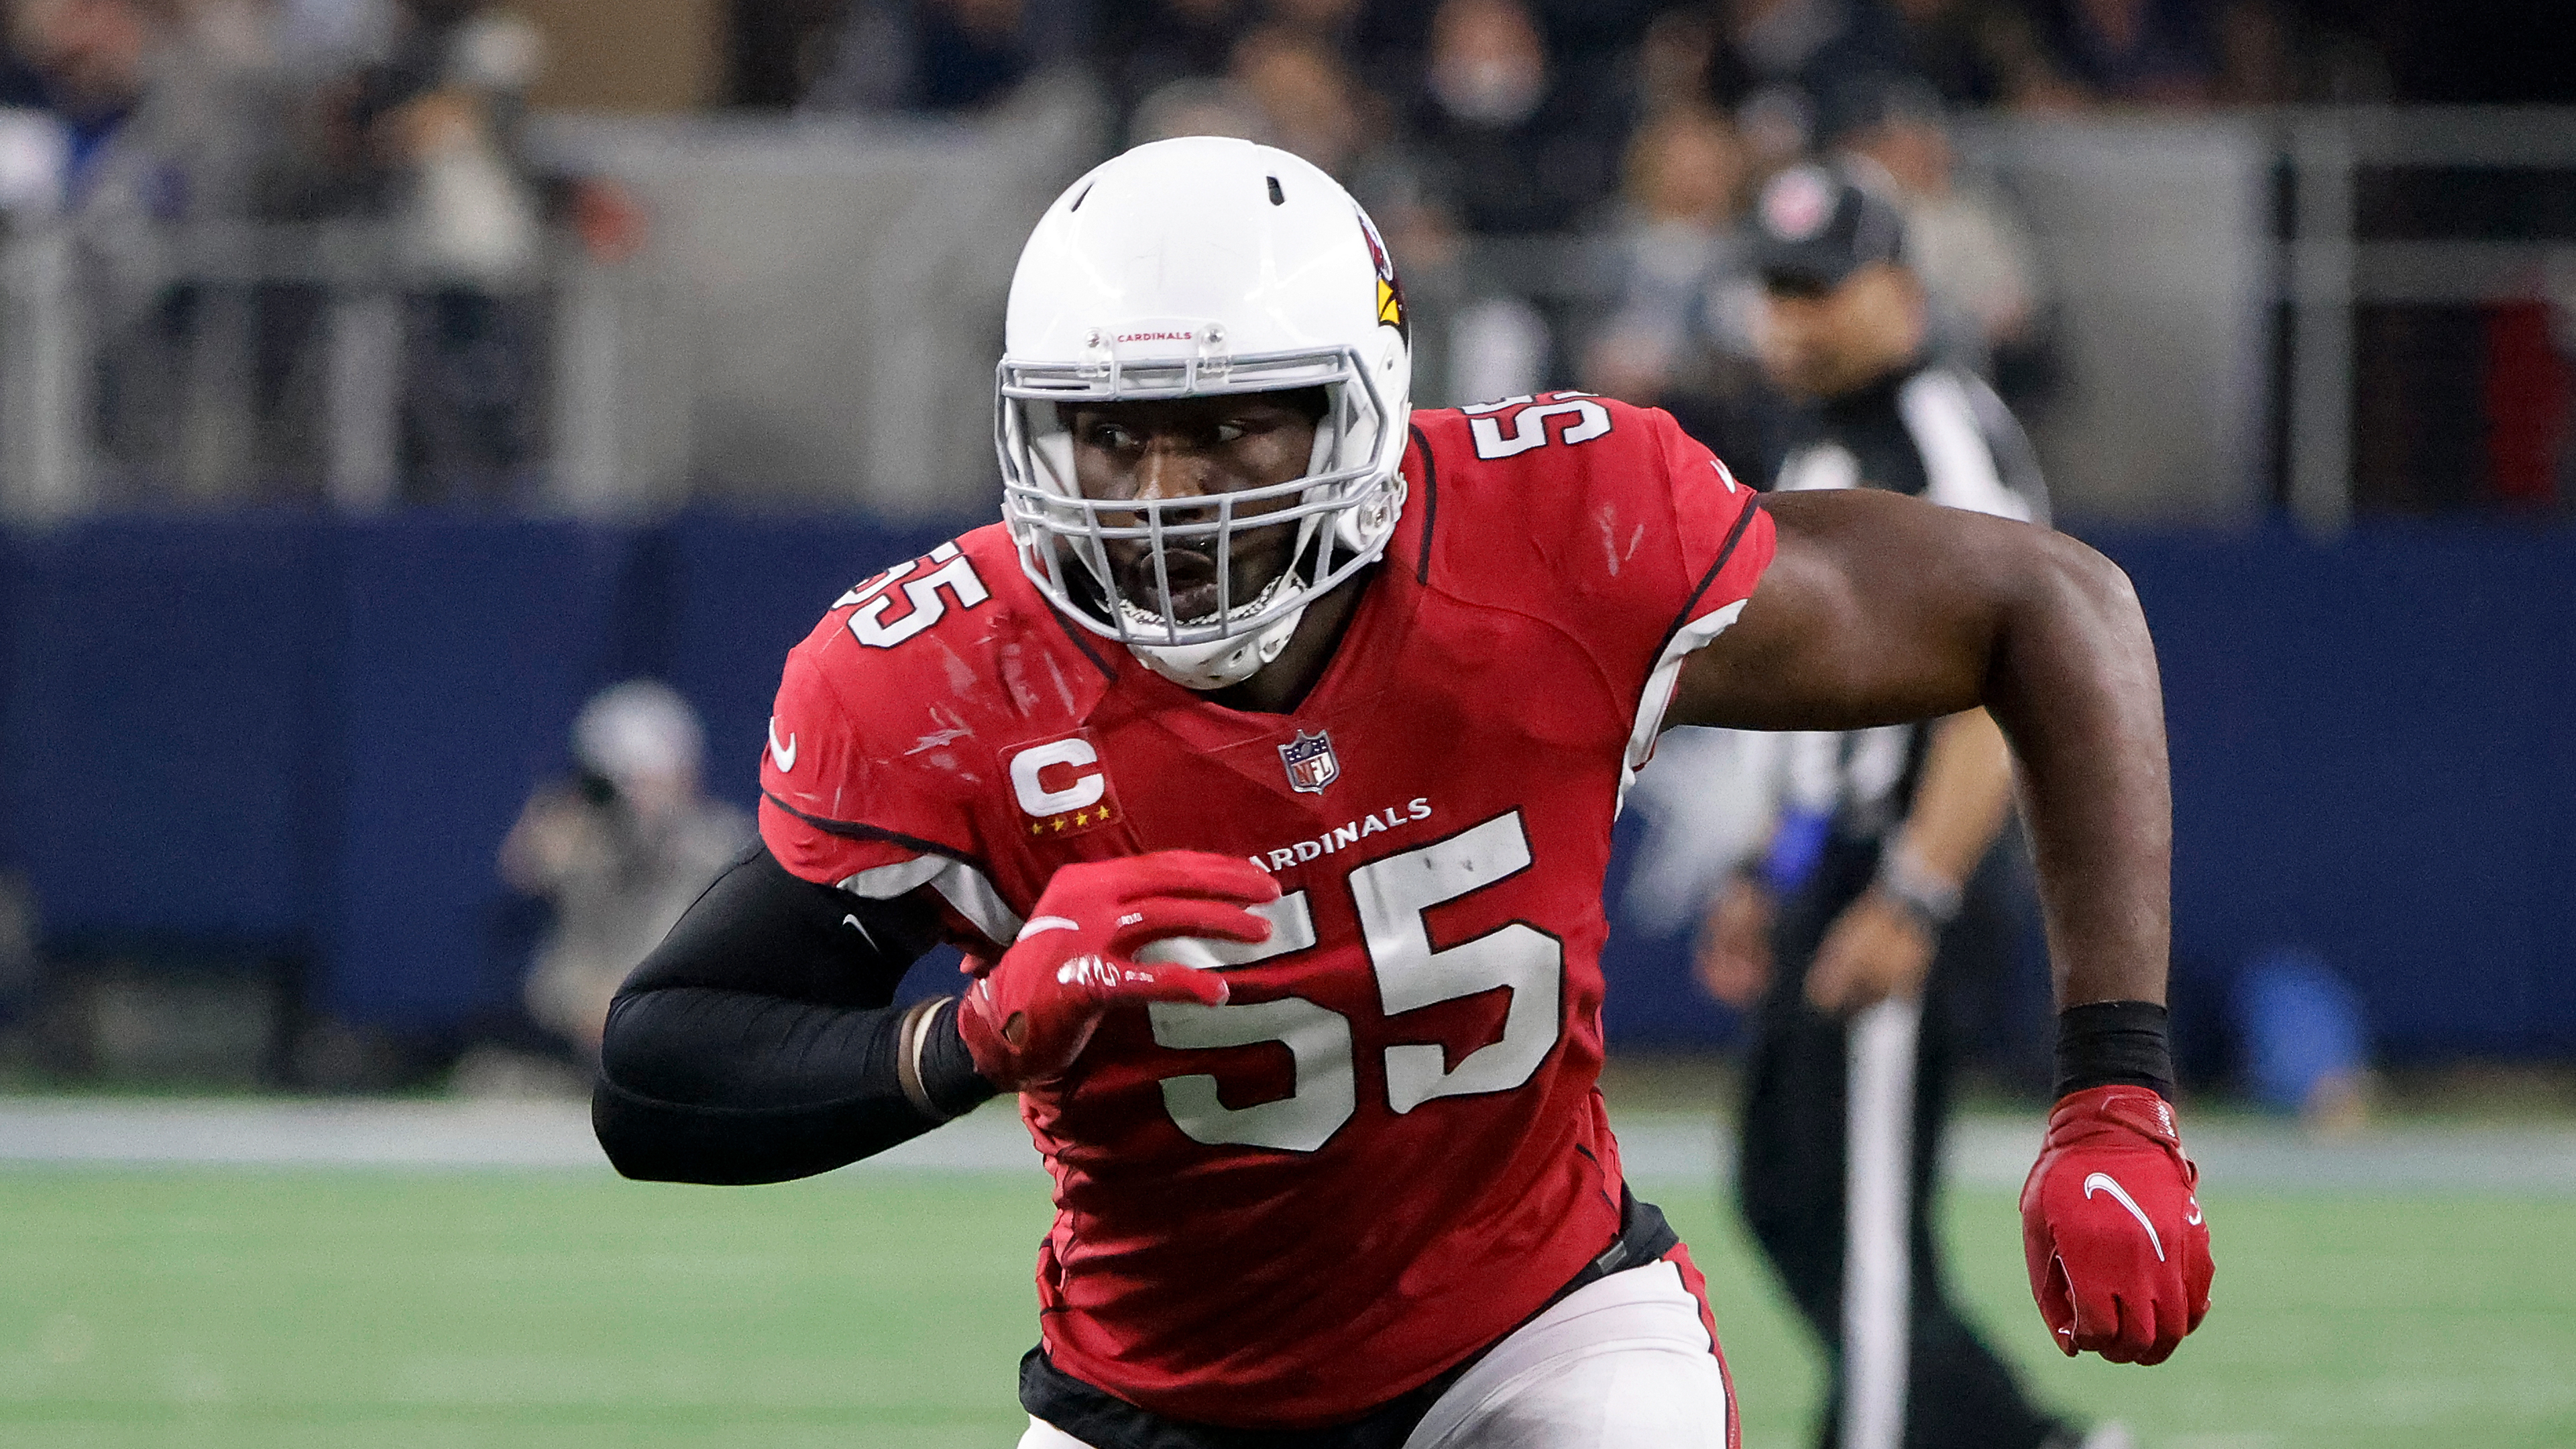 Chandler Jones Wants to Sign With Team That ‘Maximizes My Talents’ in Free Agency